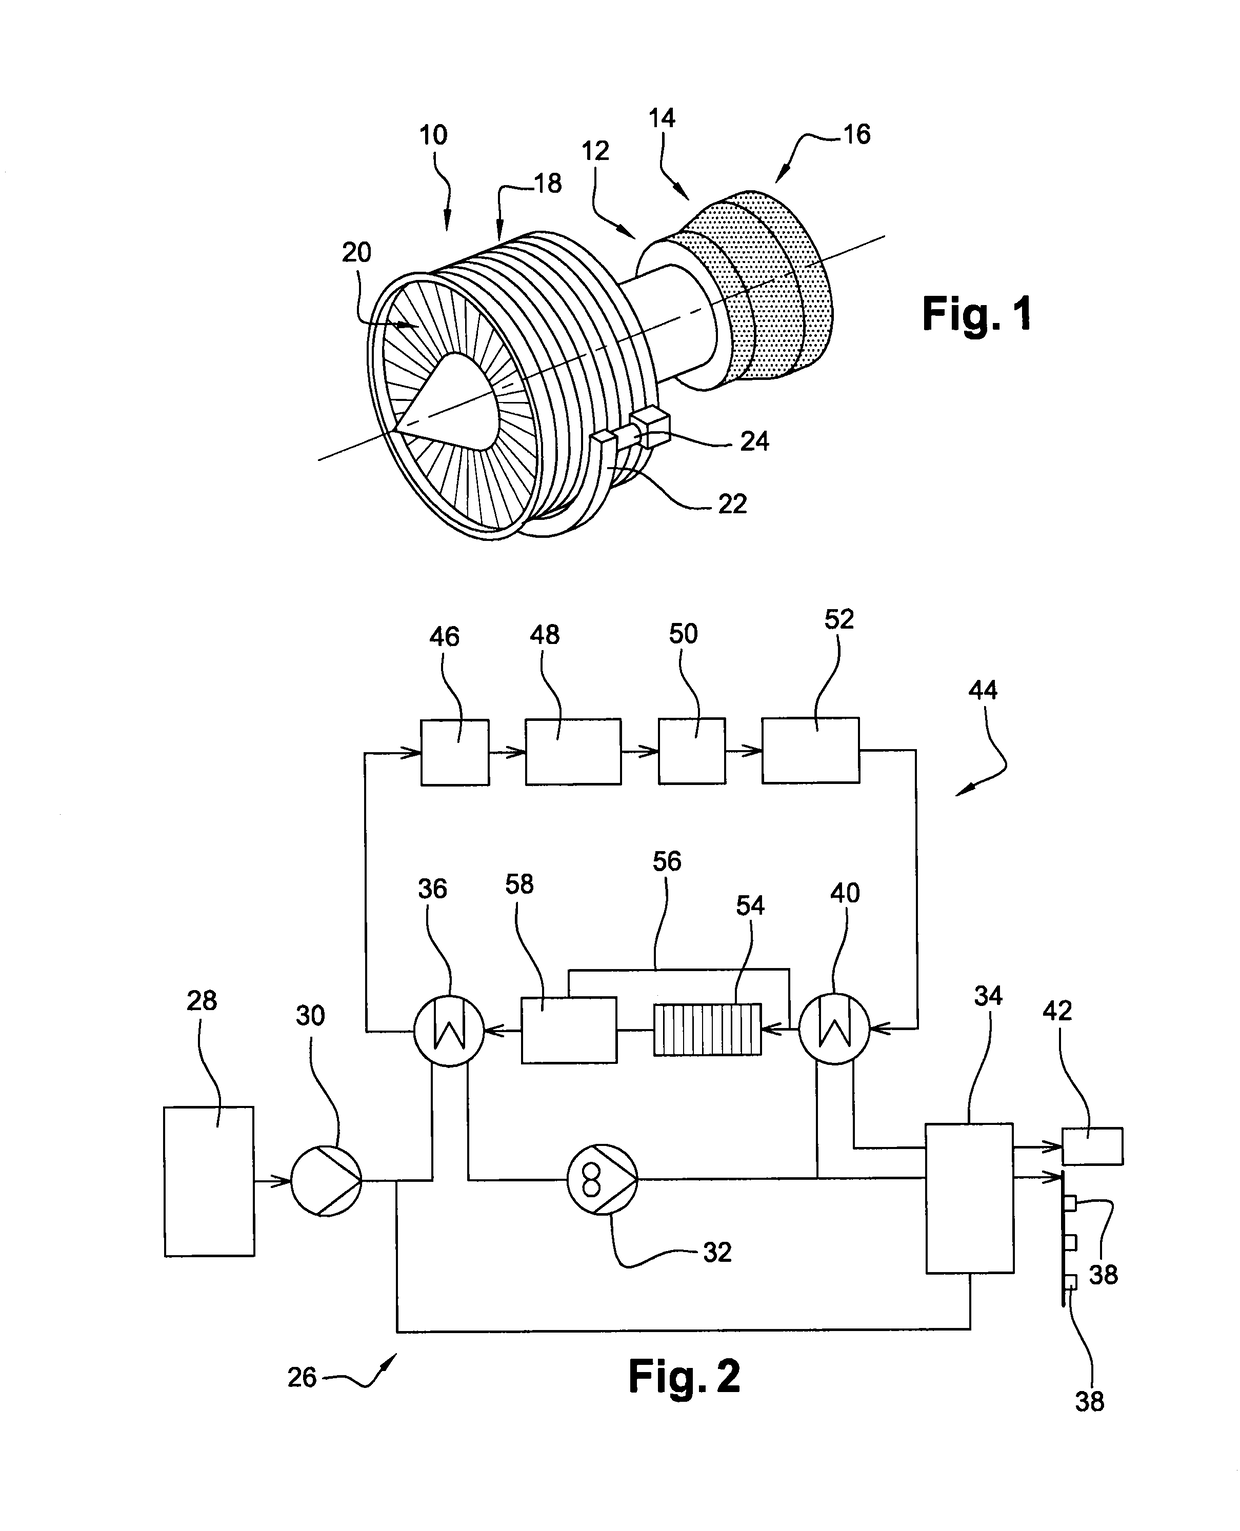 Oil and fuel circuits in a turbine engine